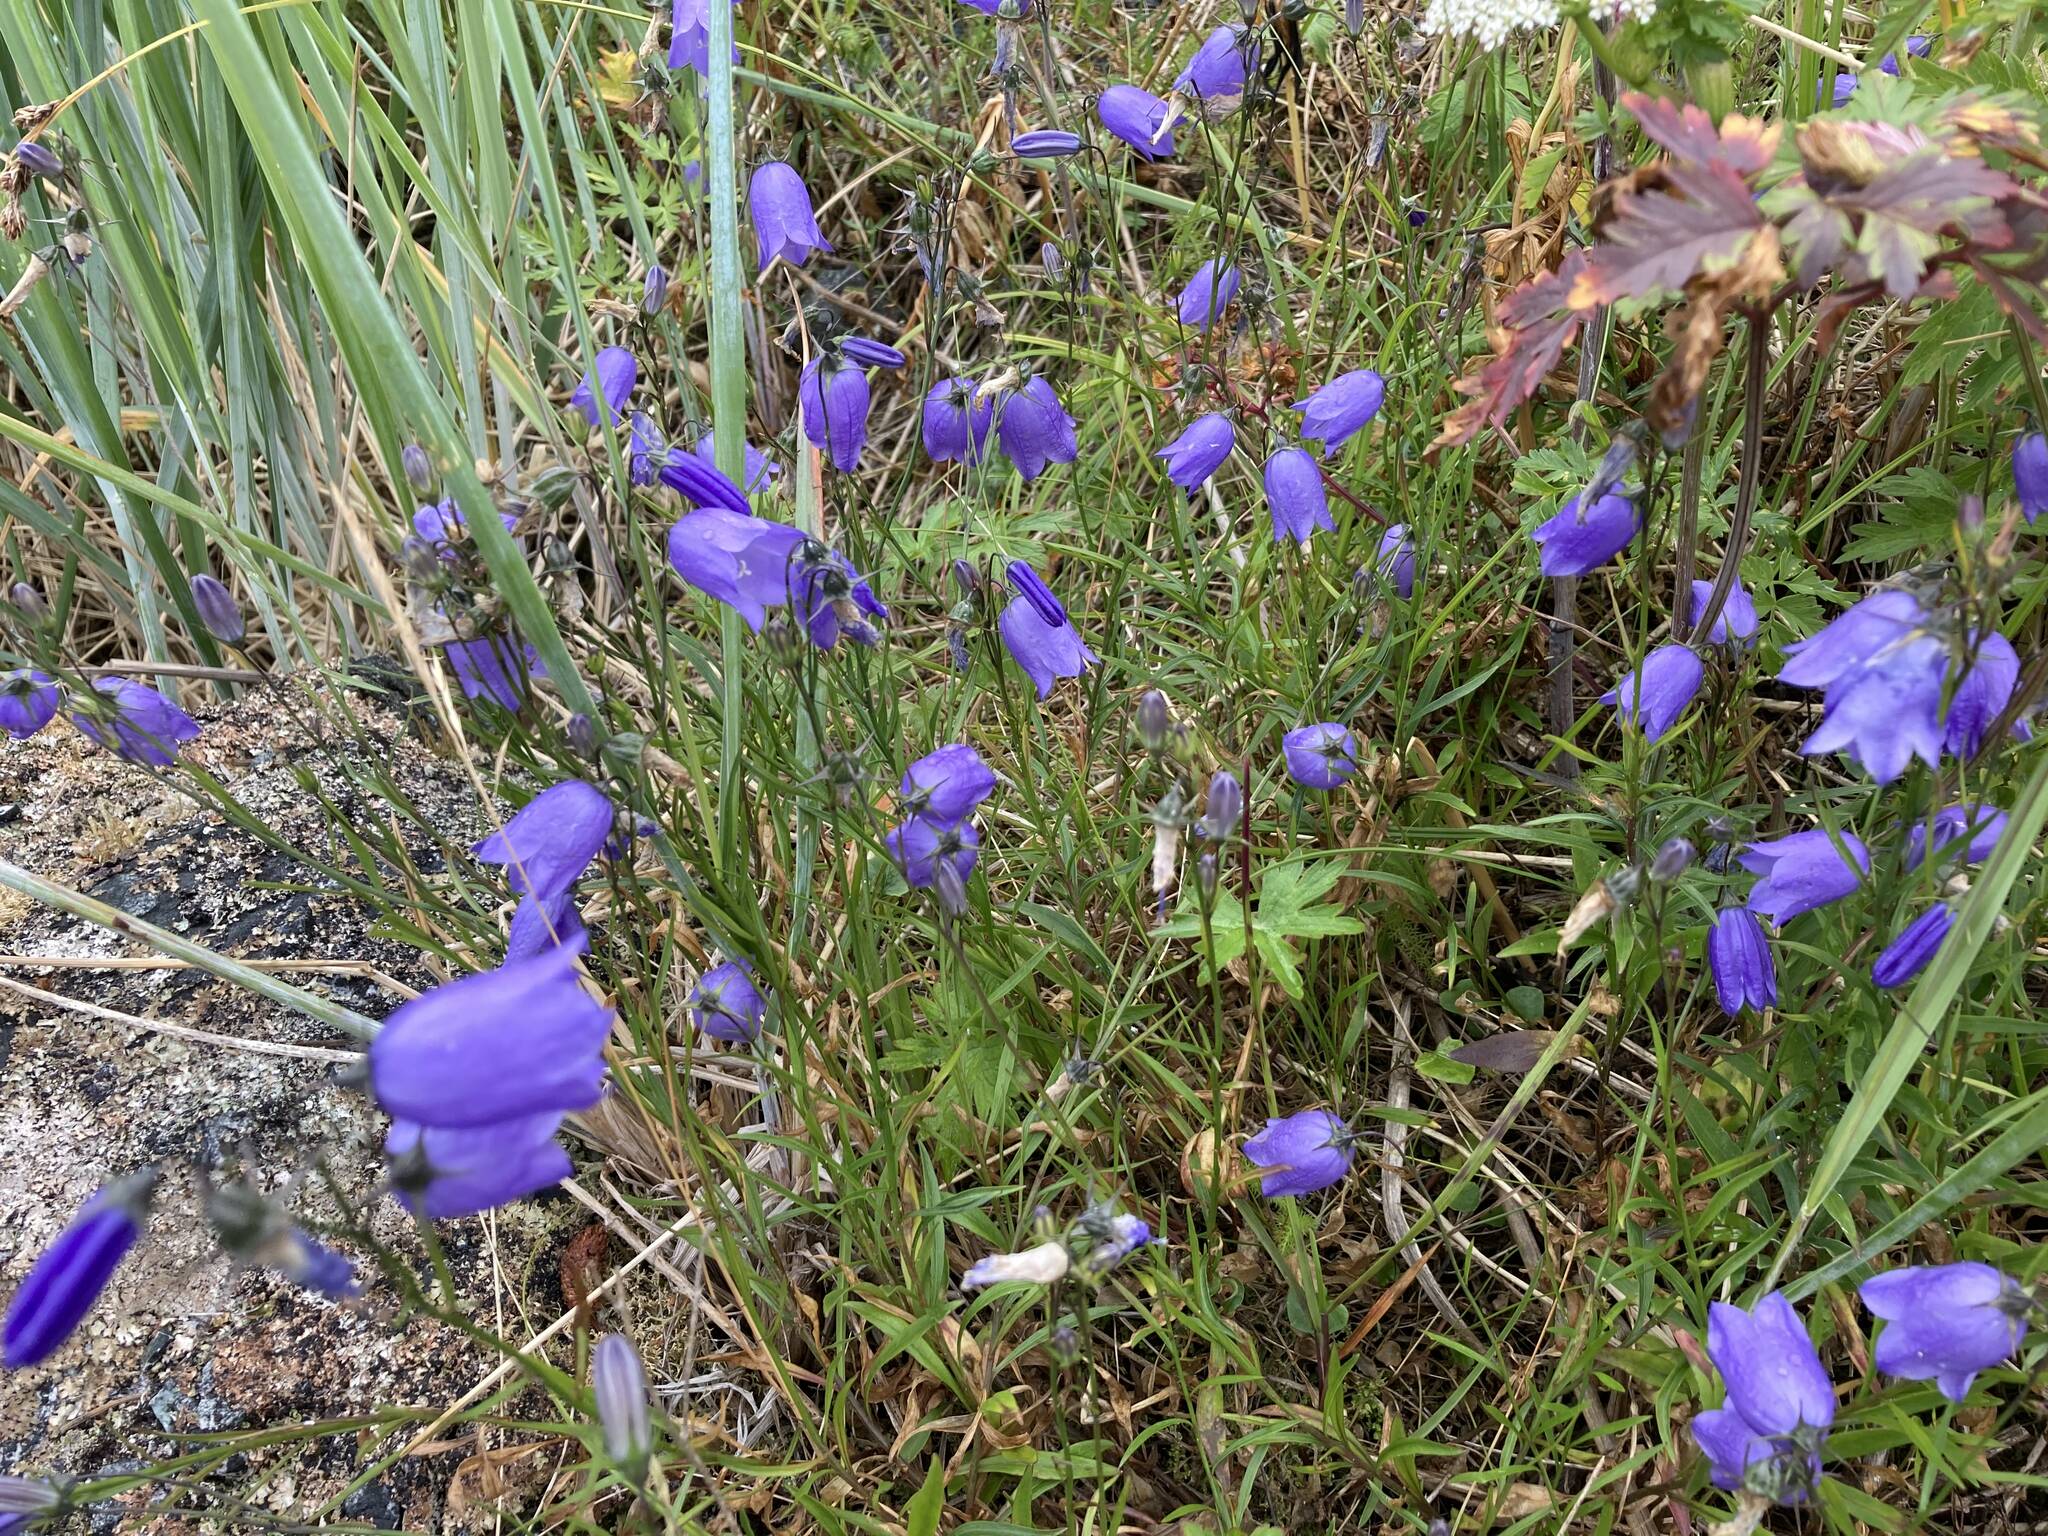 Harebells grew in clusters among the rocks at Point Kelgaya. (Mary F. Willson / For the Juneau Empire)